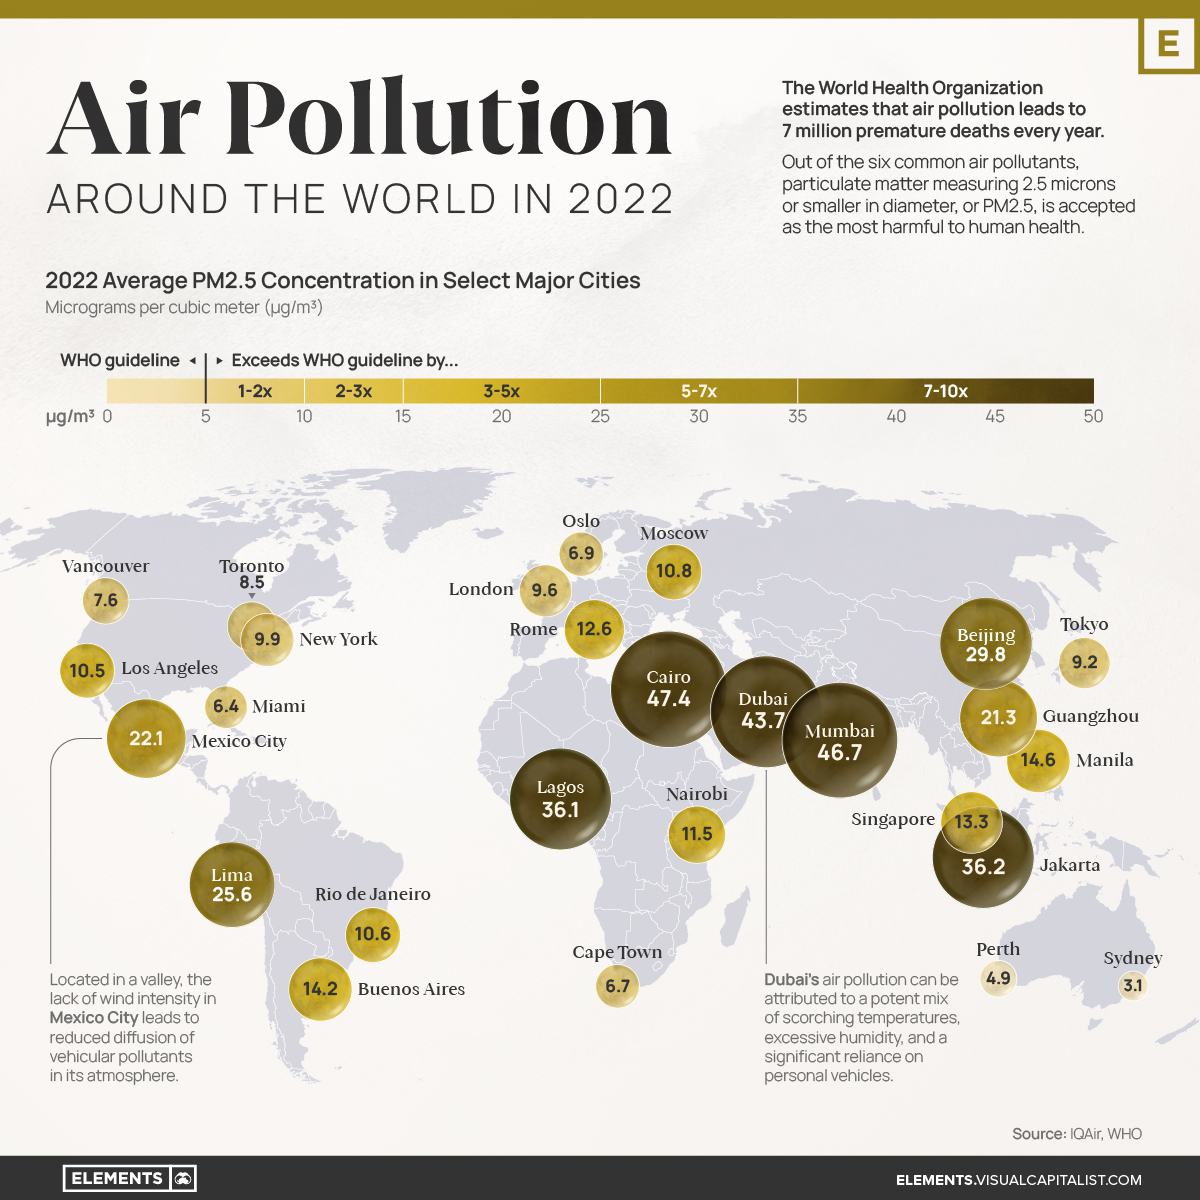 When air pollution becomes a health equity issue